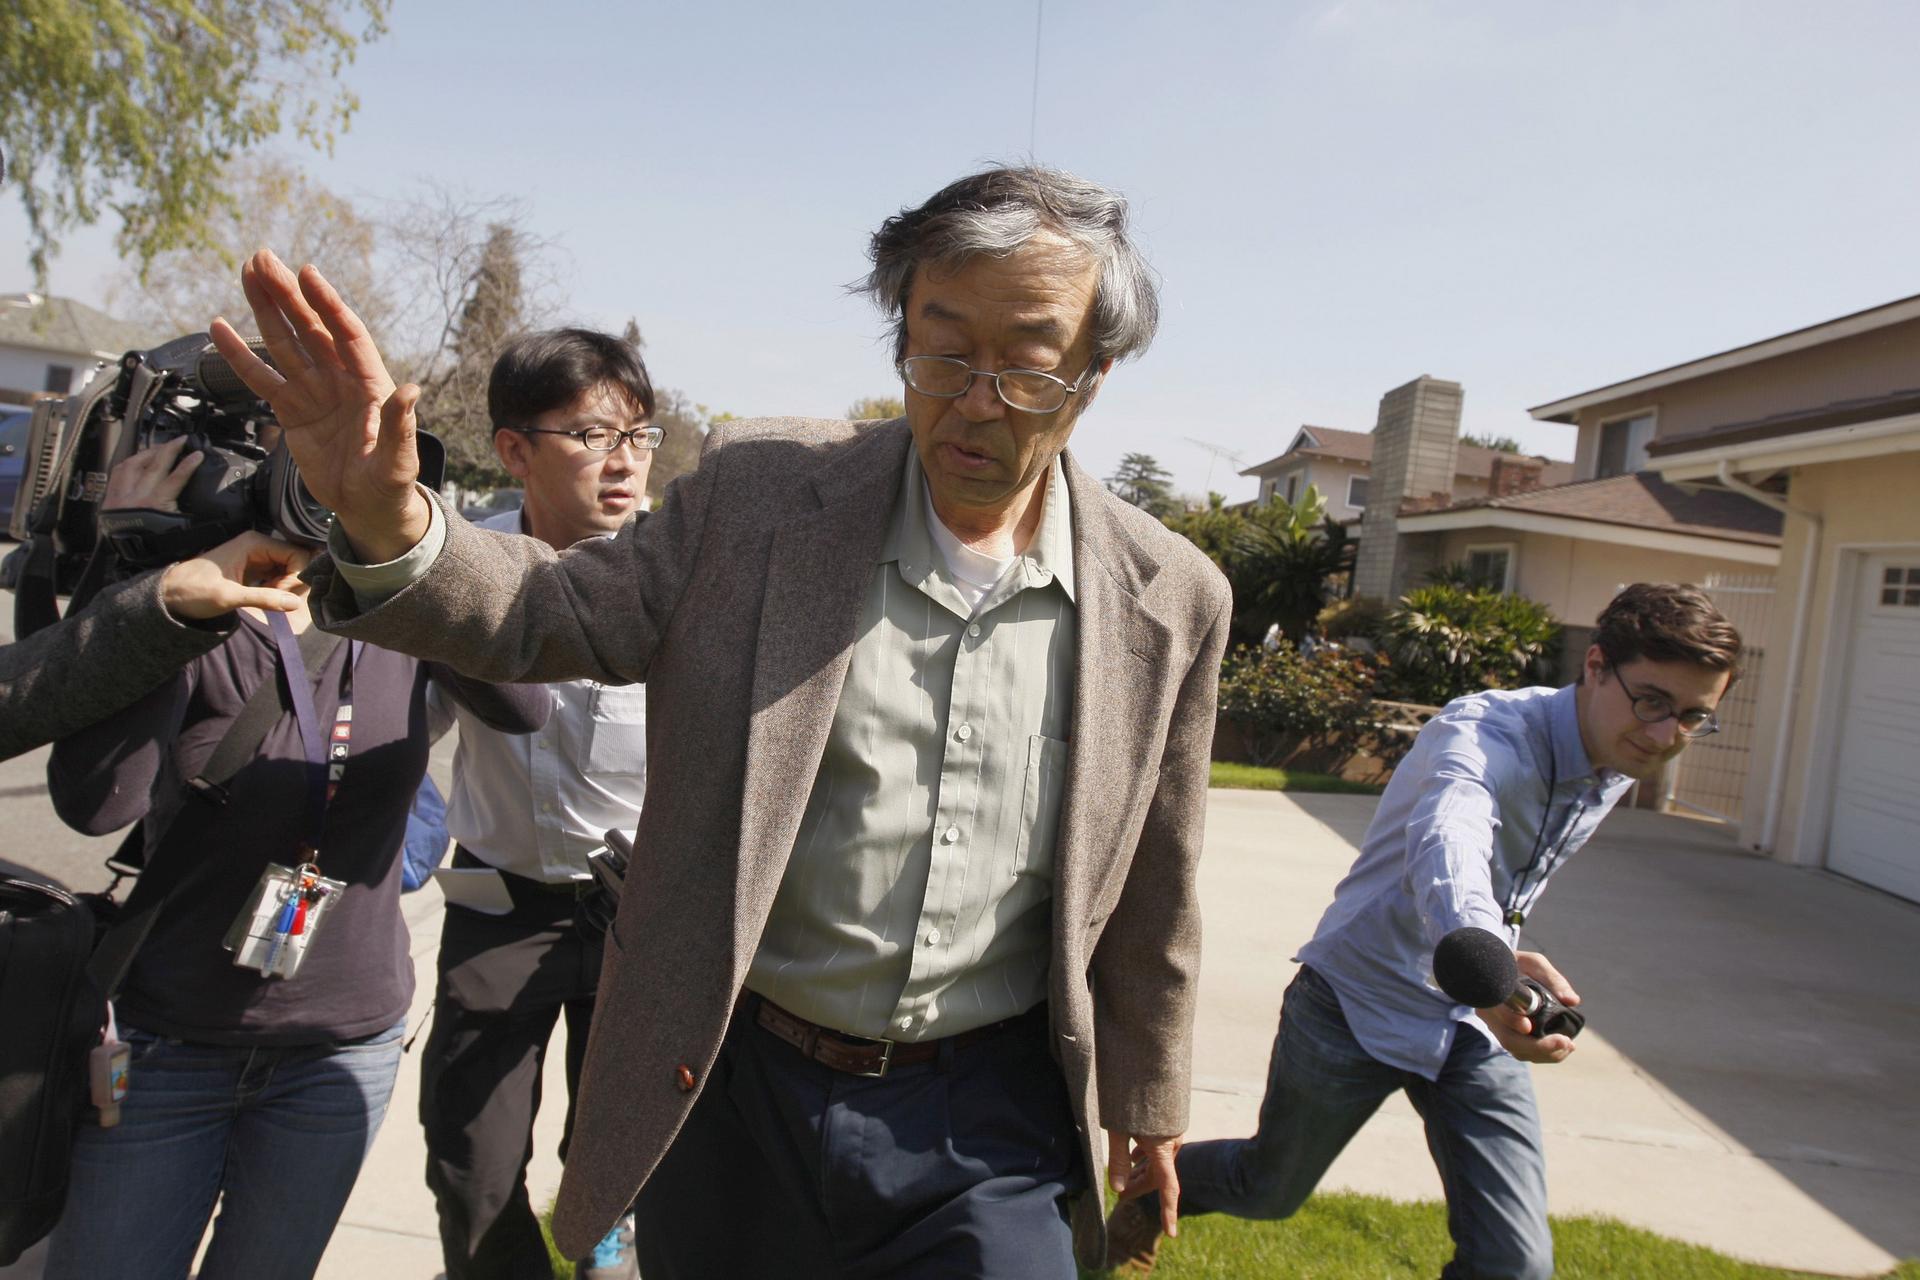 Satoshi Nakamoto, reportedly the creator of the virtual currency bitcoin, is followed by eager reporters as he leaves his home in California on Thursday. Photo: Reuters